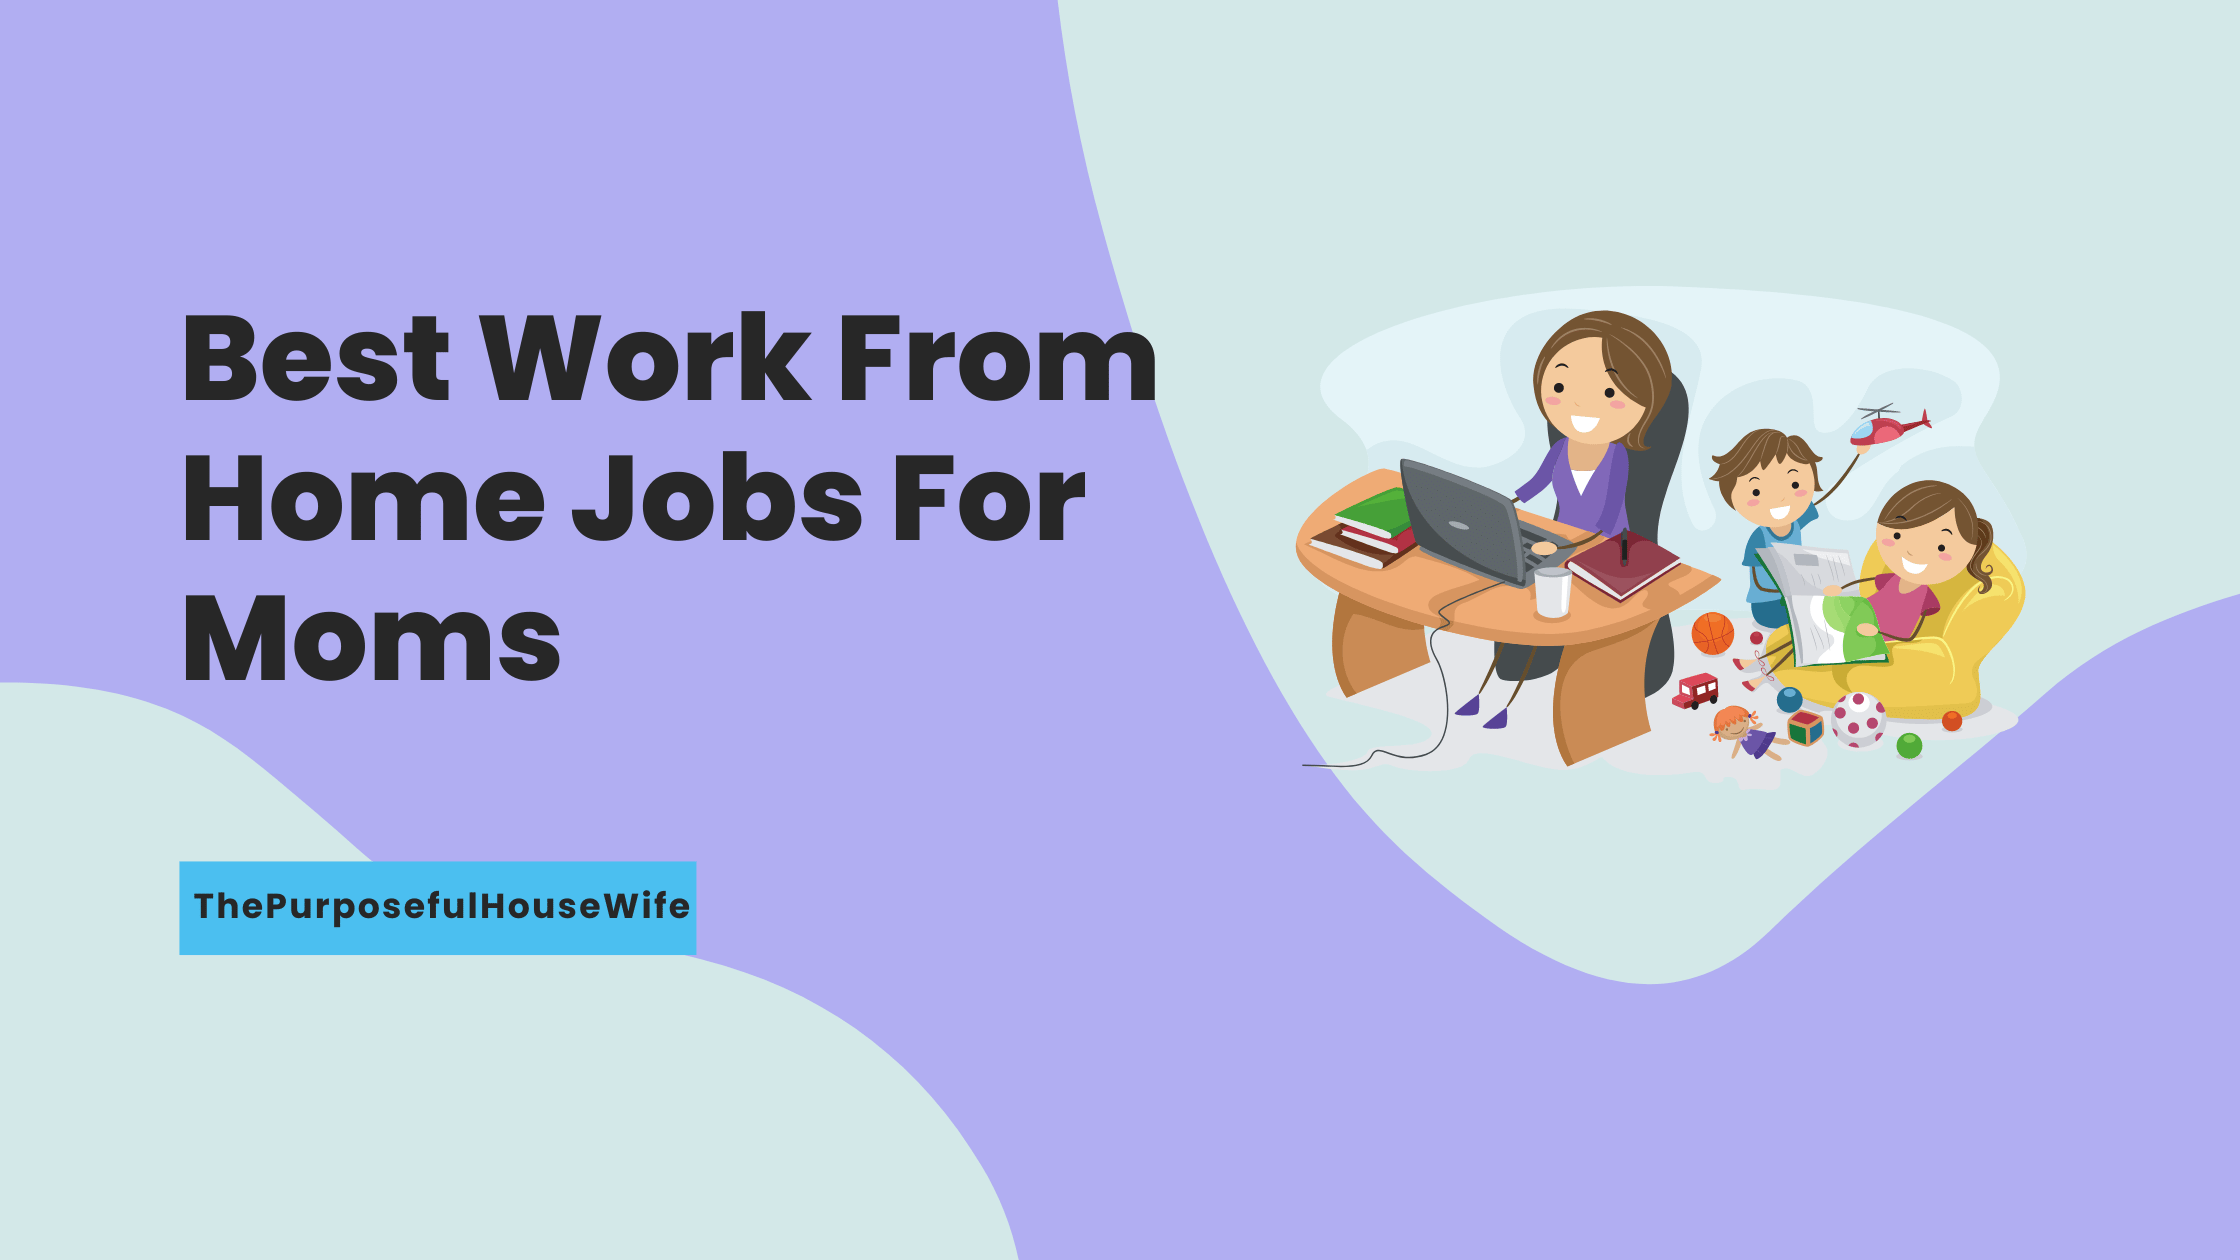 Best Work From Home Jobs For Moms - ThePurposefulHouseWife